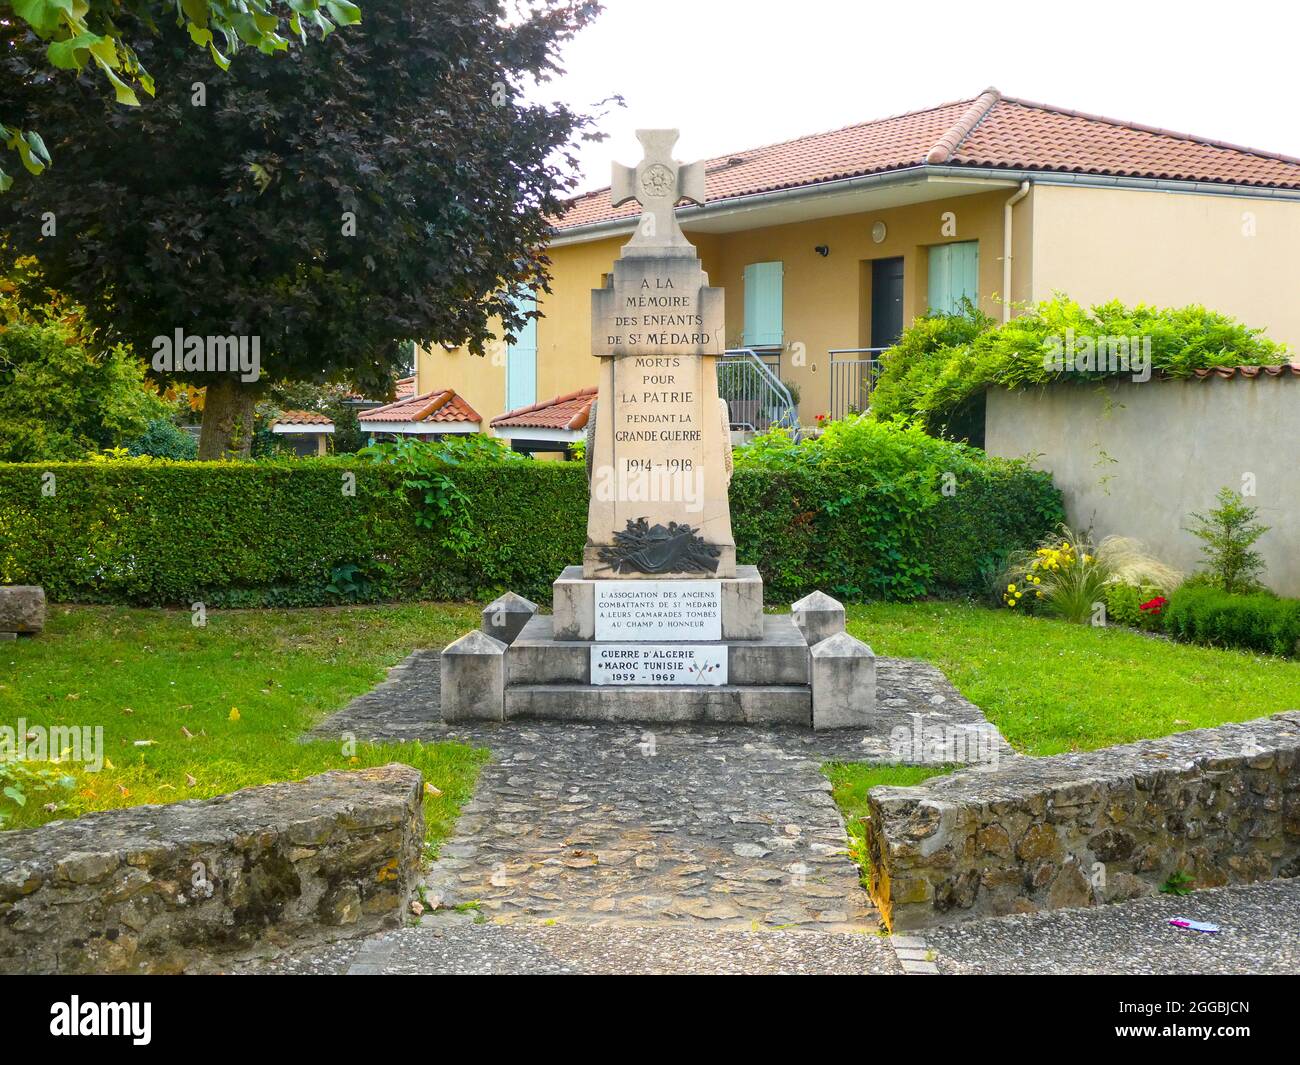 Monument to people of Saint Medard who died for their country in the first world war, in Saint Medard en Forez in Loire department of central France Stock Photo